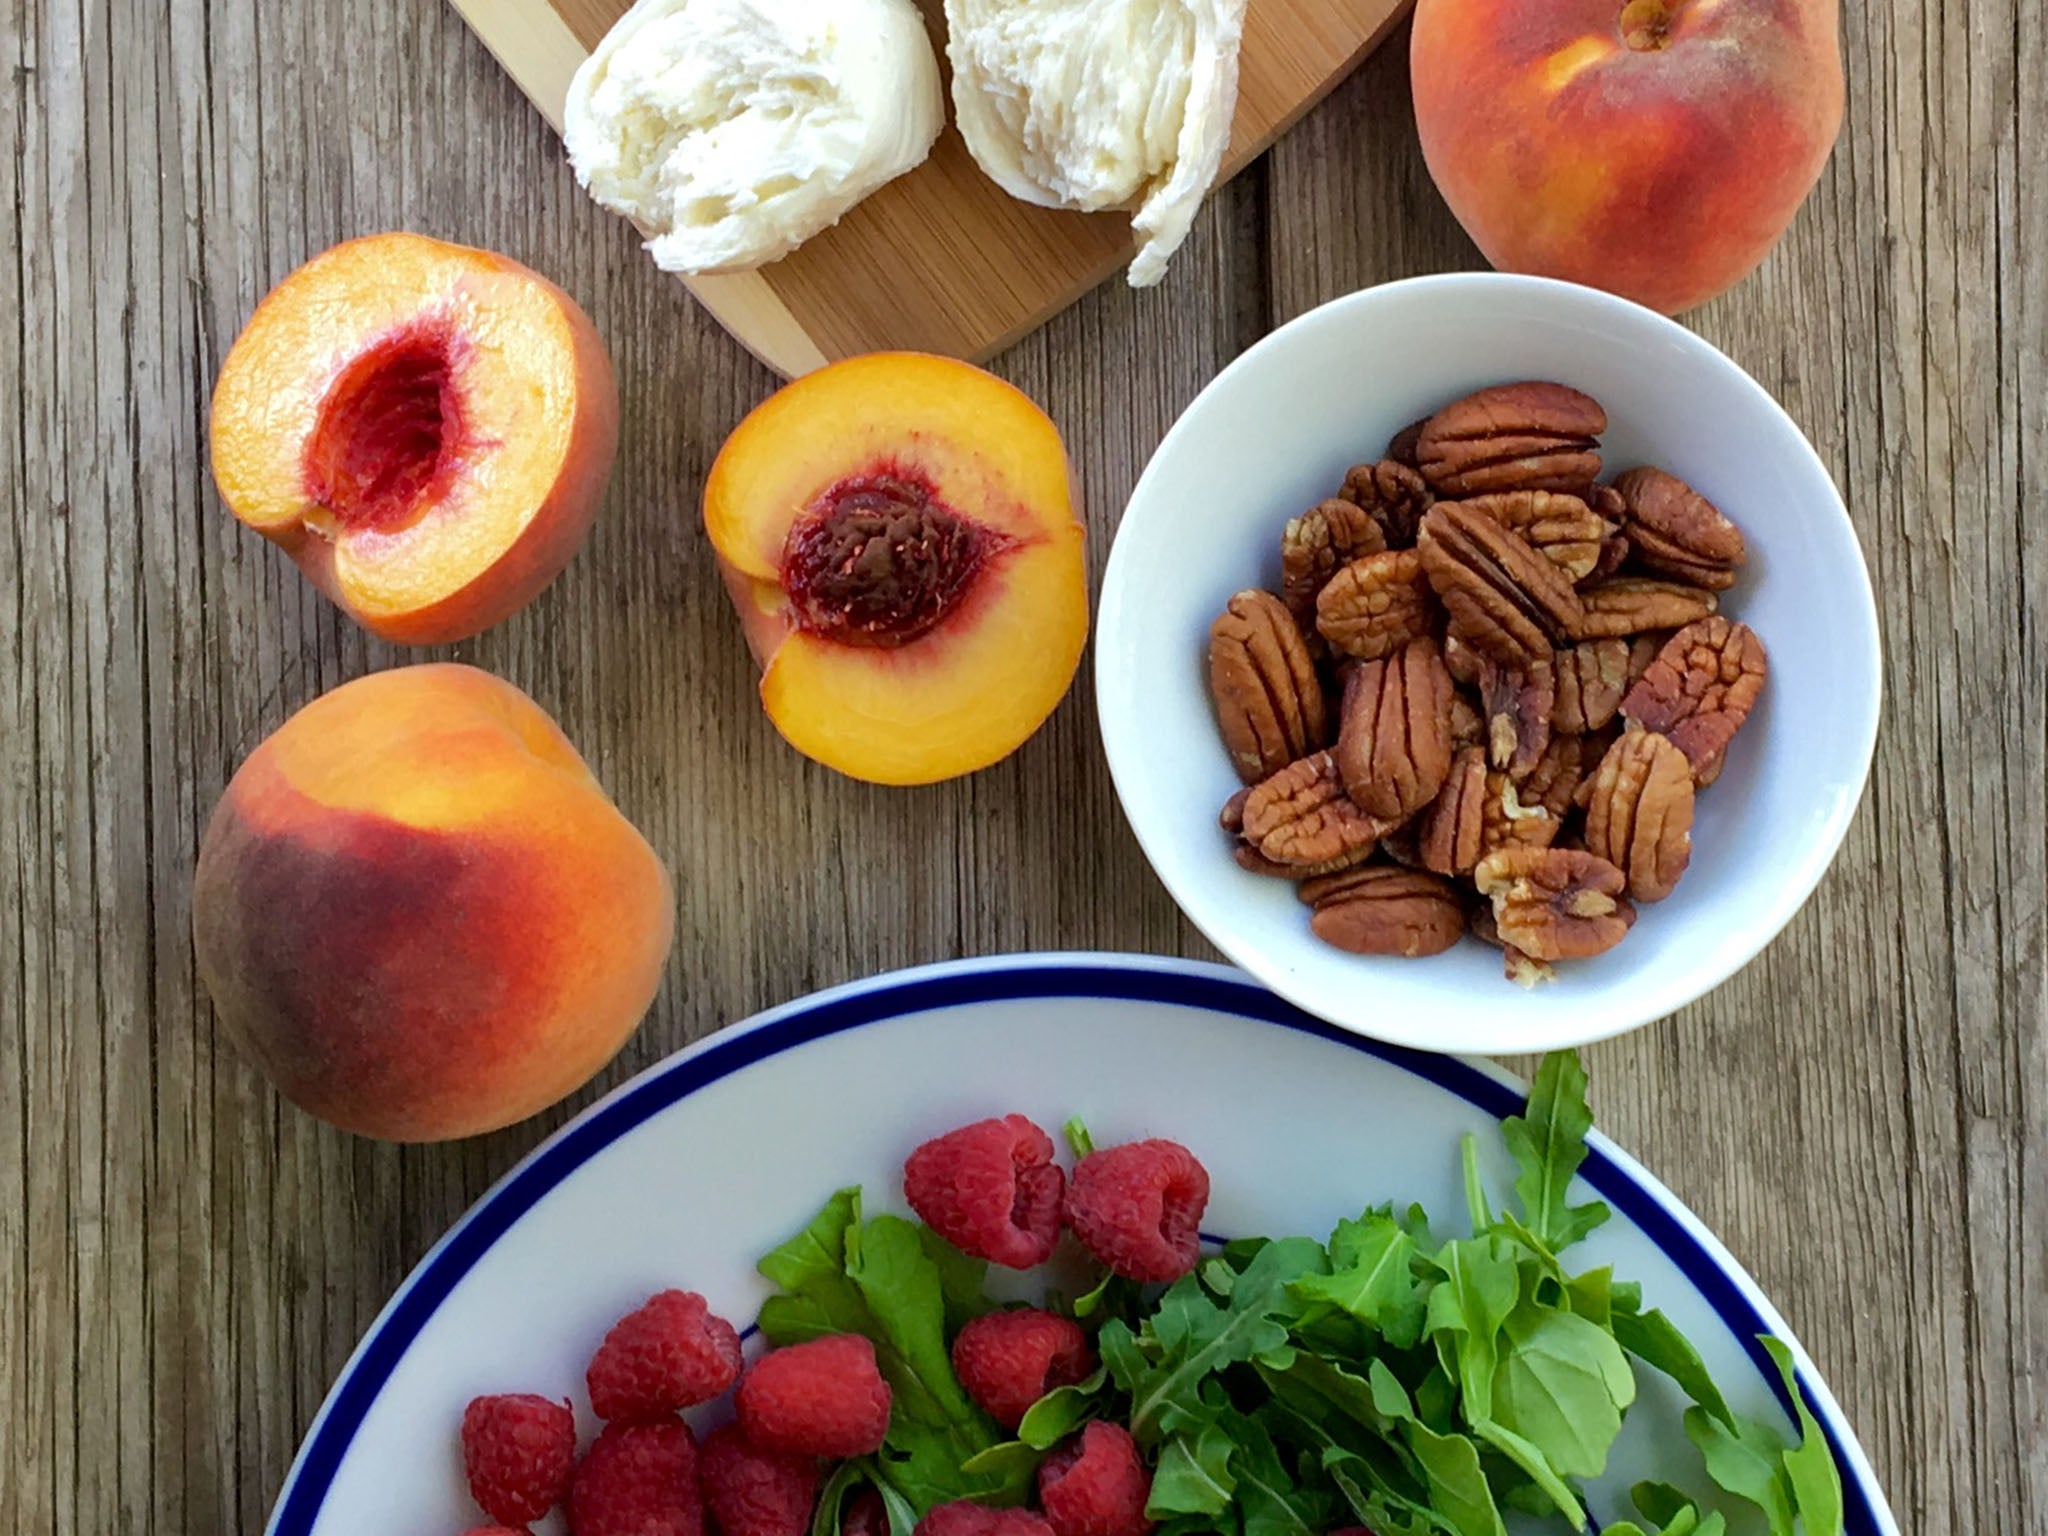 Grilled ripe peaches will steal the show